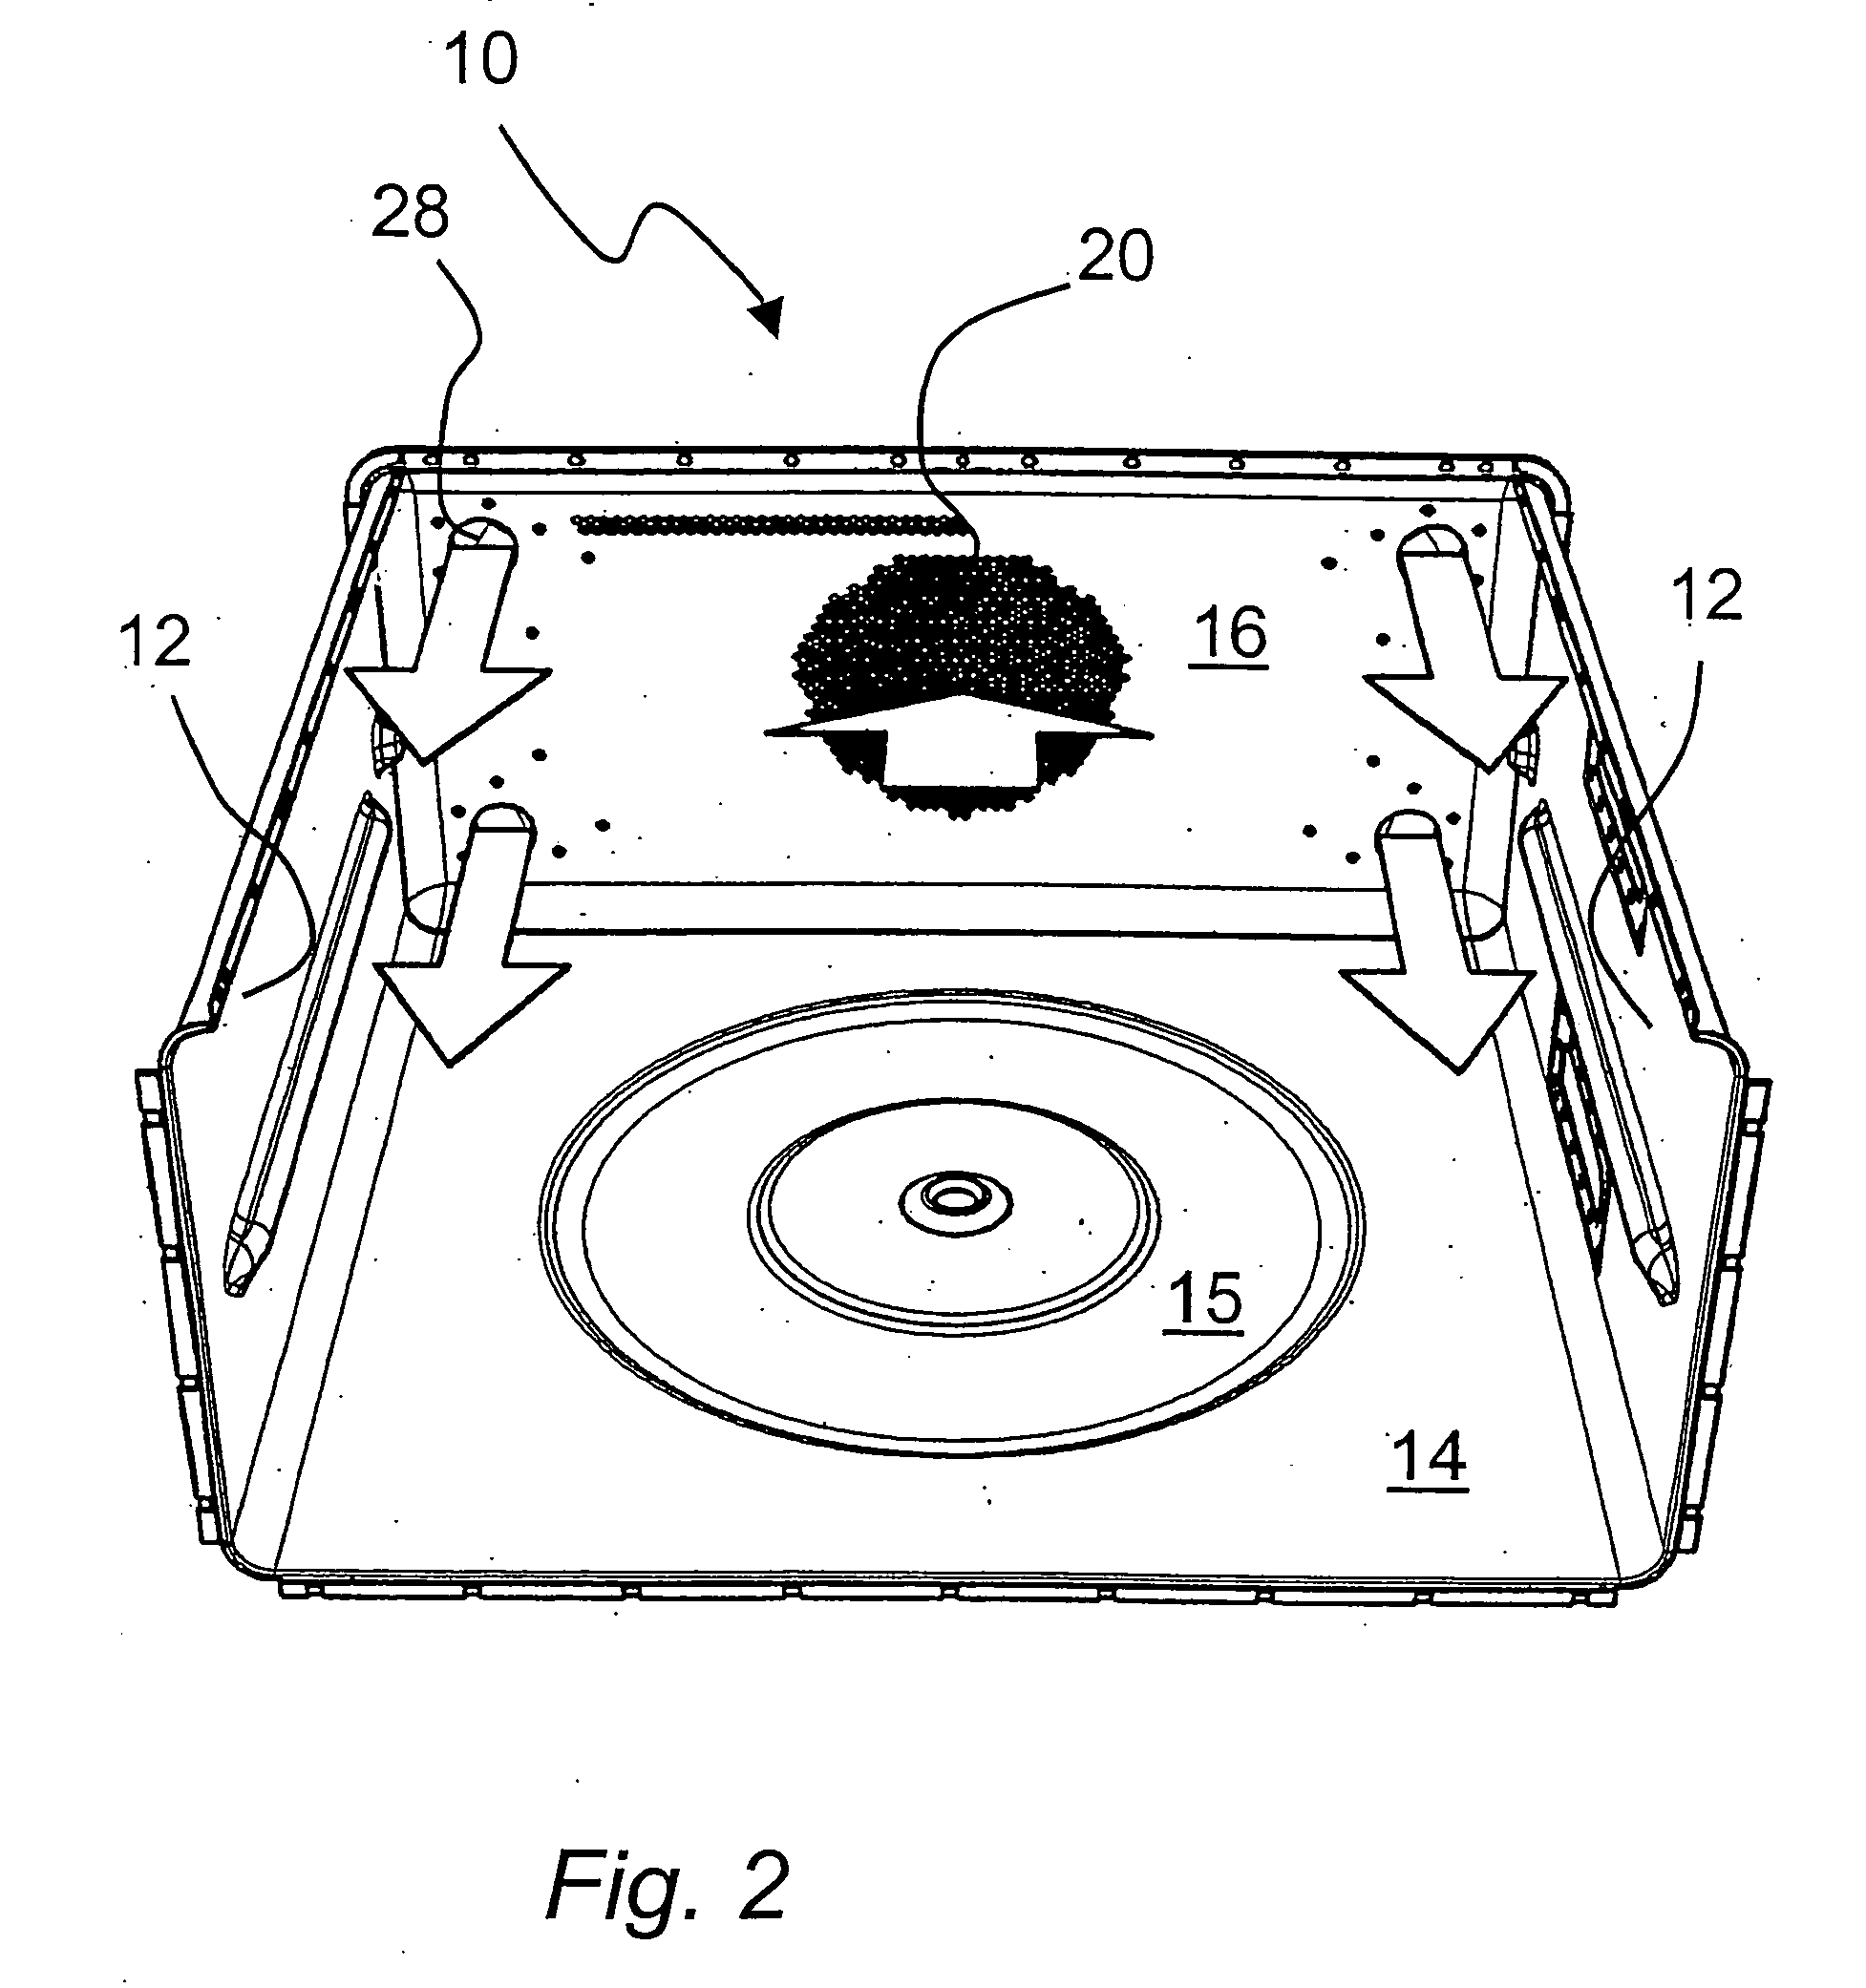 Microwave oven with convection heating